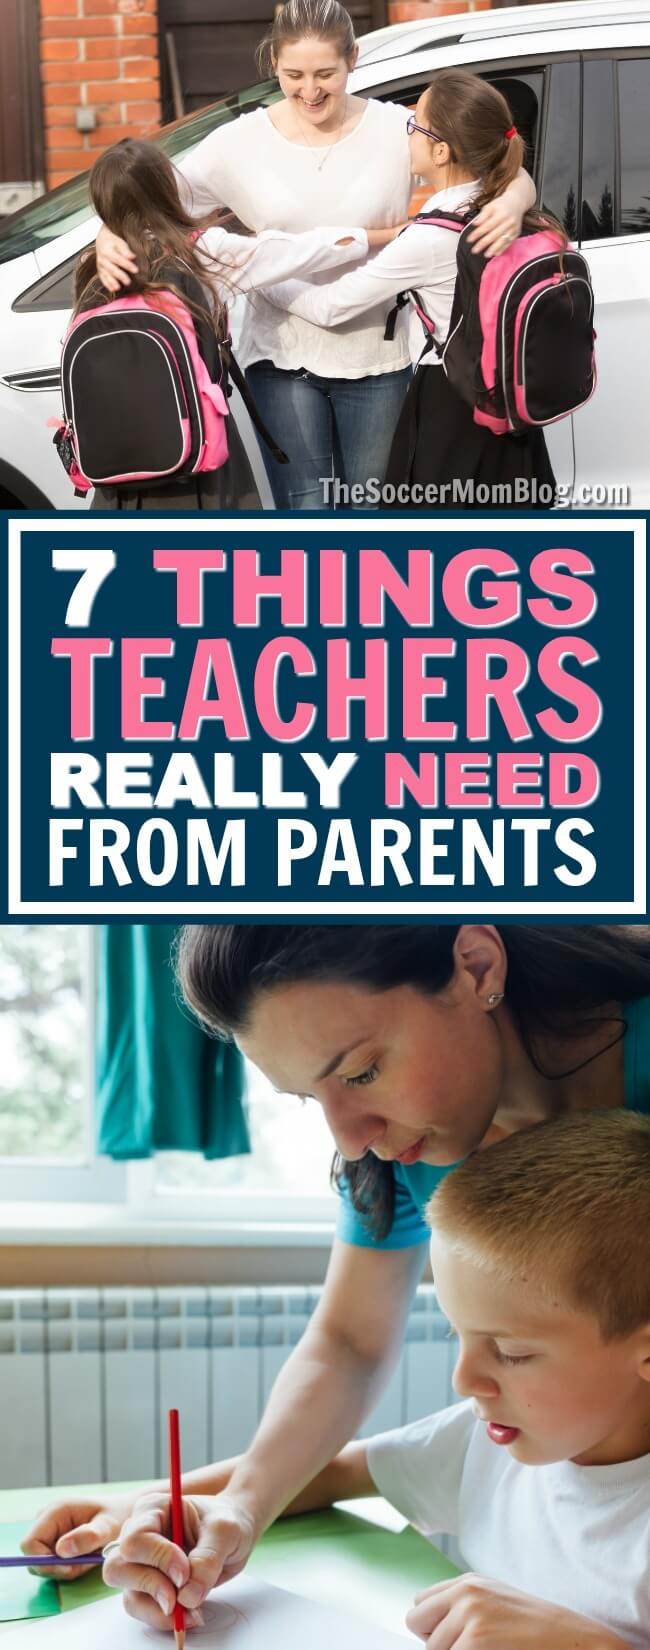 The average educator spends $500 of their own money every year. 7 things teachers need (in their own words) from parents to make the school year a success.